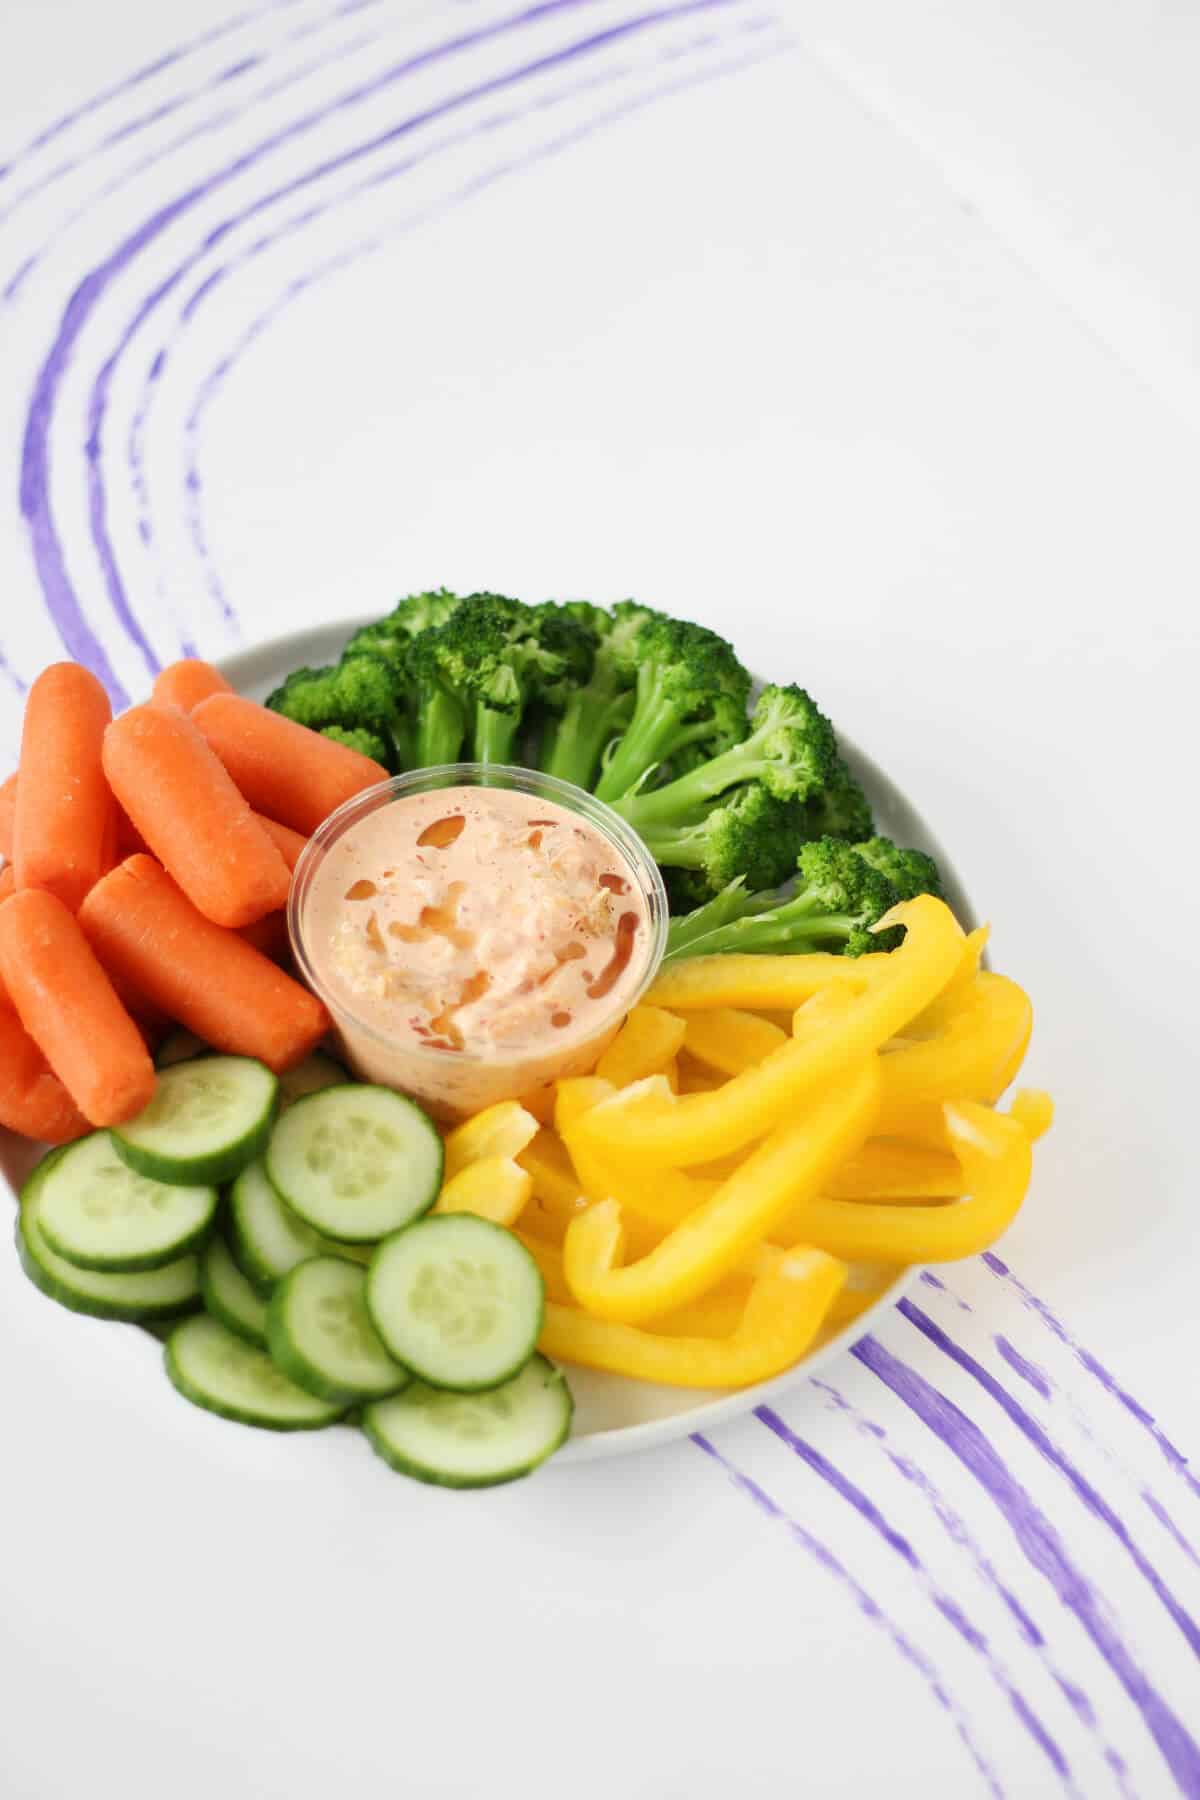 A plate filled with vegetables (baby carrots, broccoli, bell pepper and cucumber) and a dish of orange-y kimchi mayo in the center.